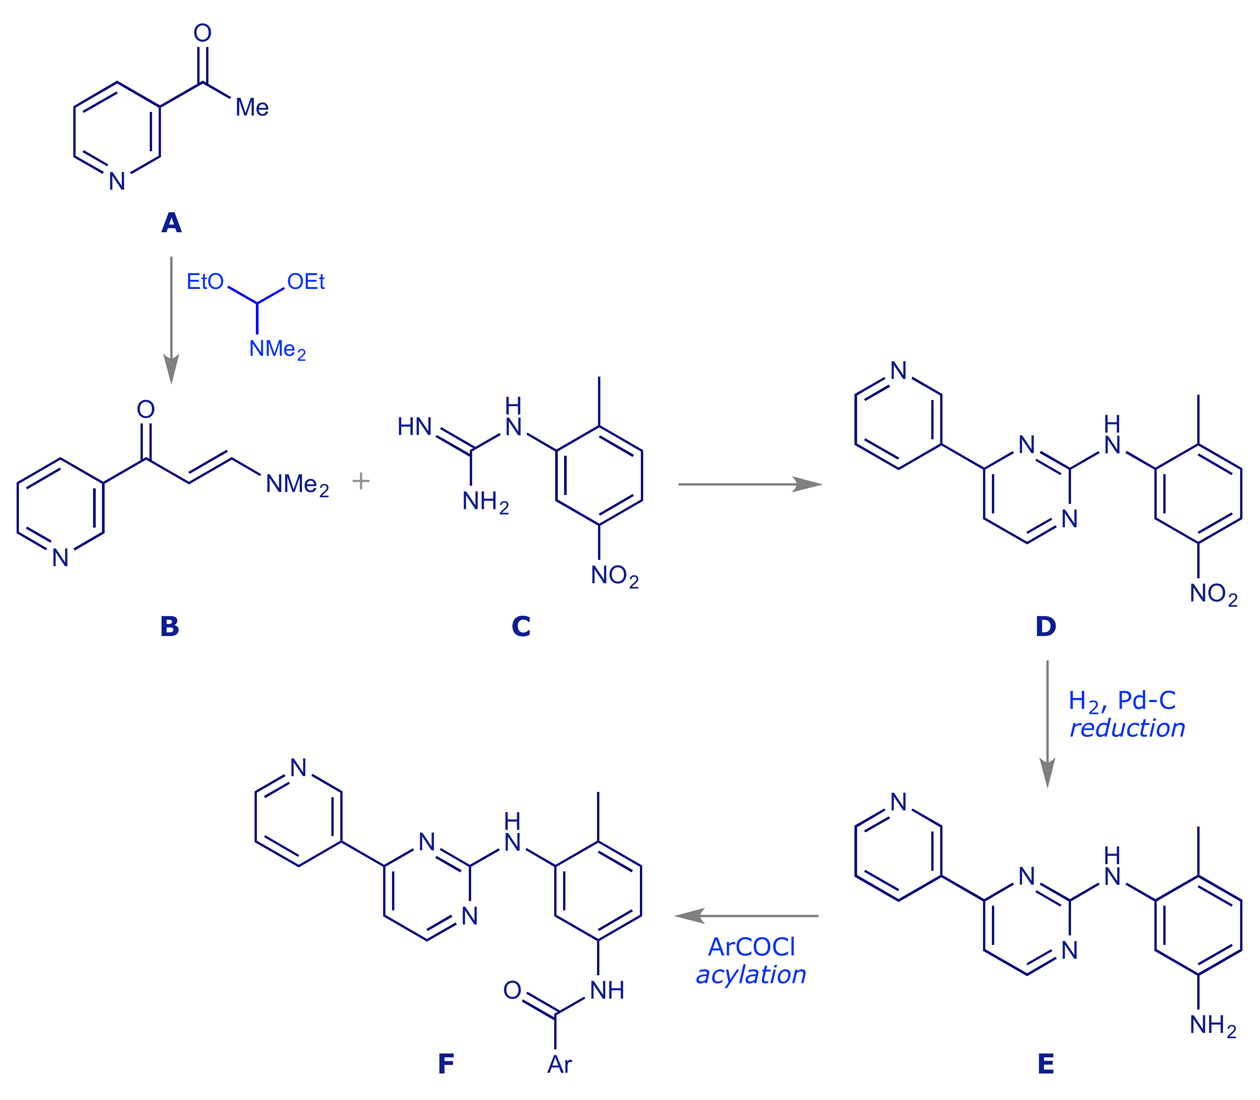 Reaction scheme showing the synthesis of imatinib from 3-acetylpyridine